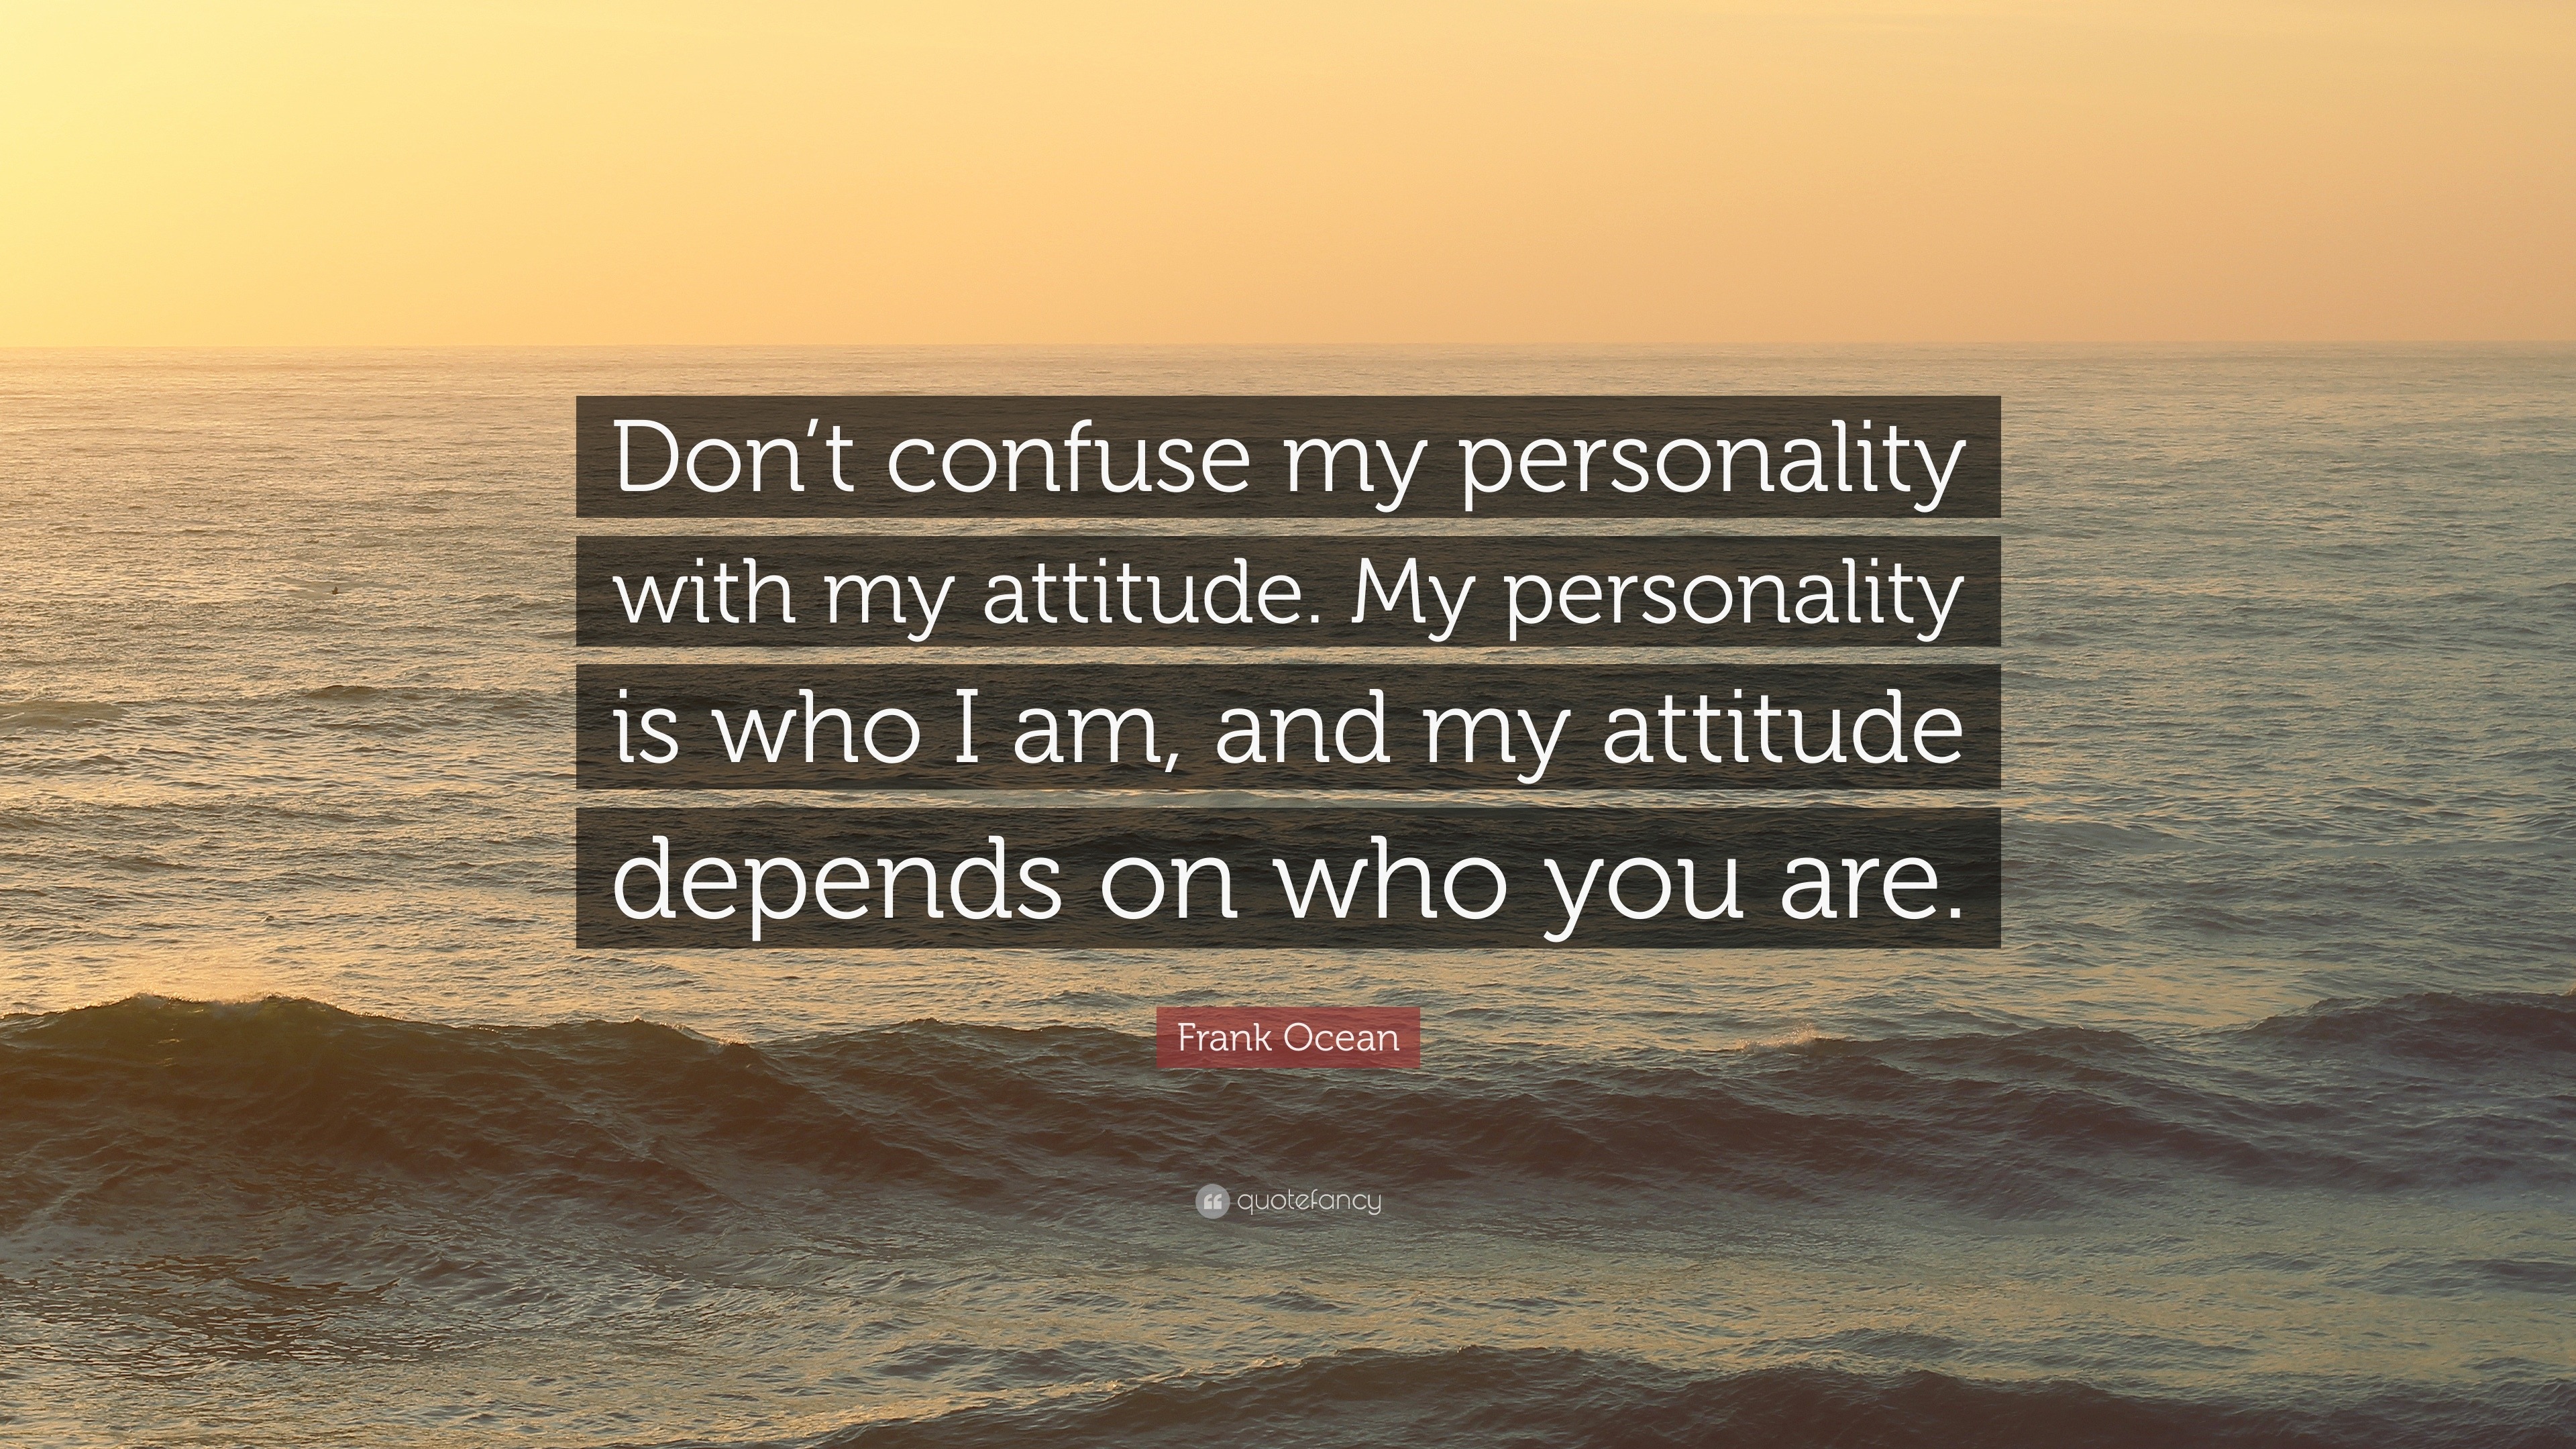 Frank Ocean Quote: "Don't confuse my personality with my ...